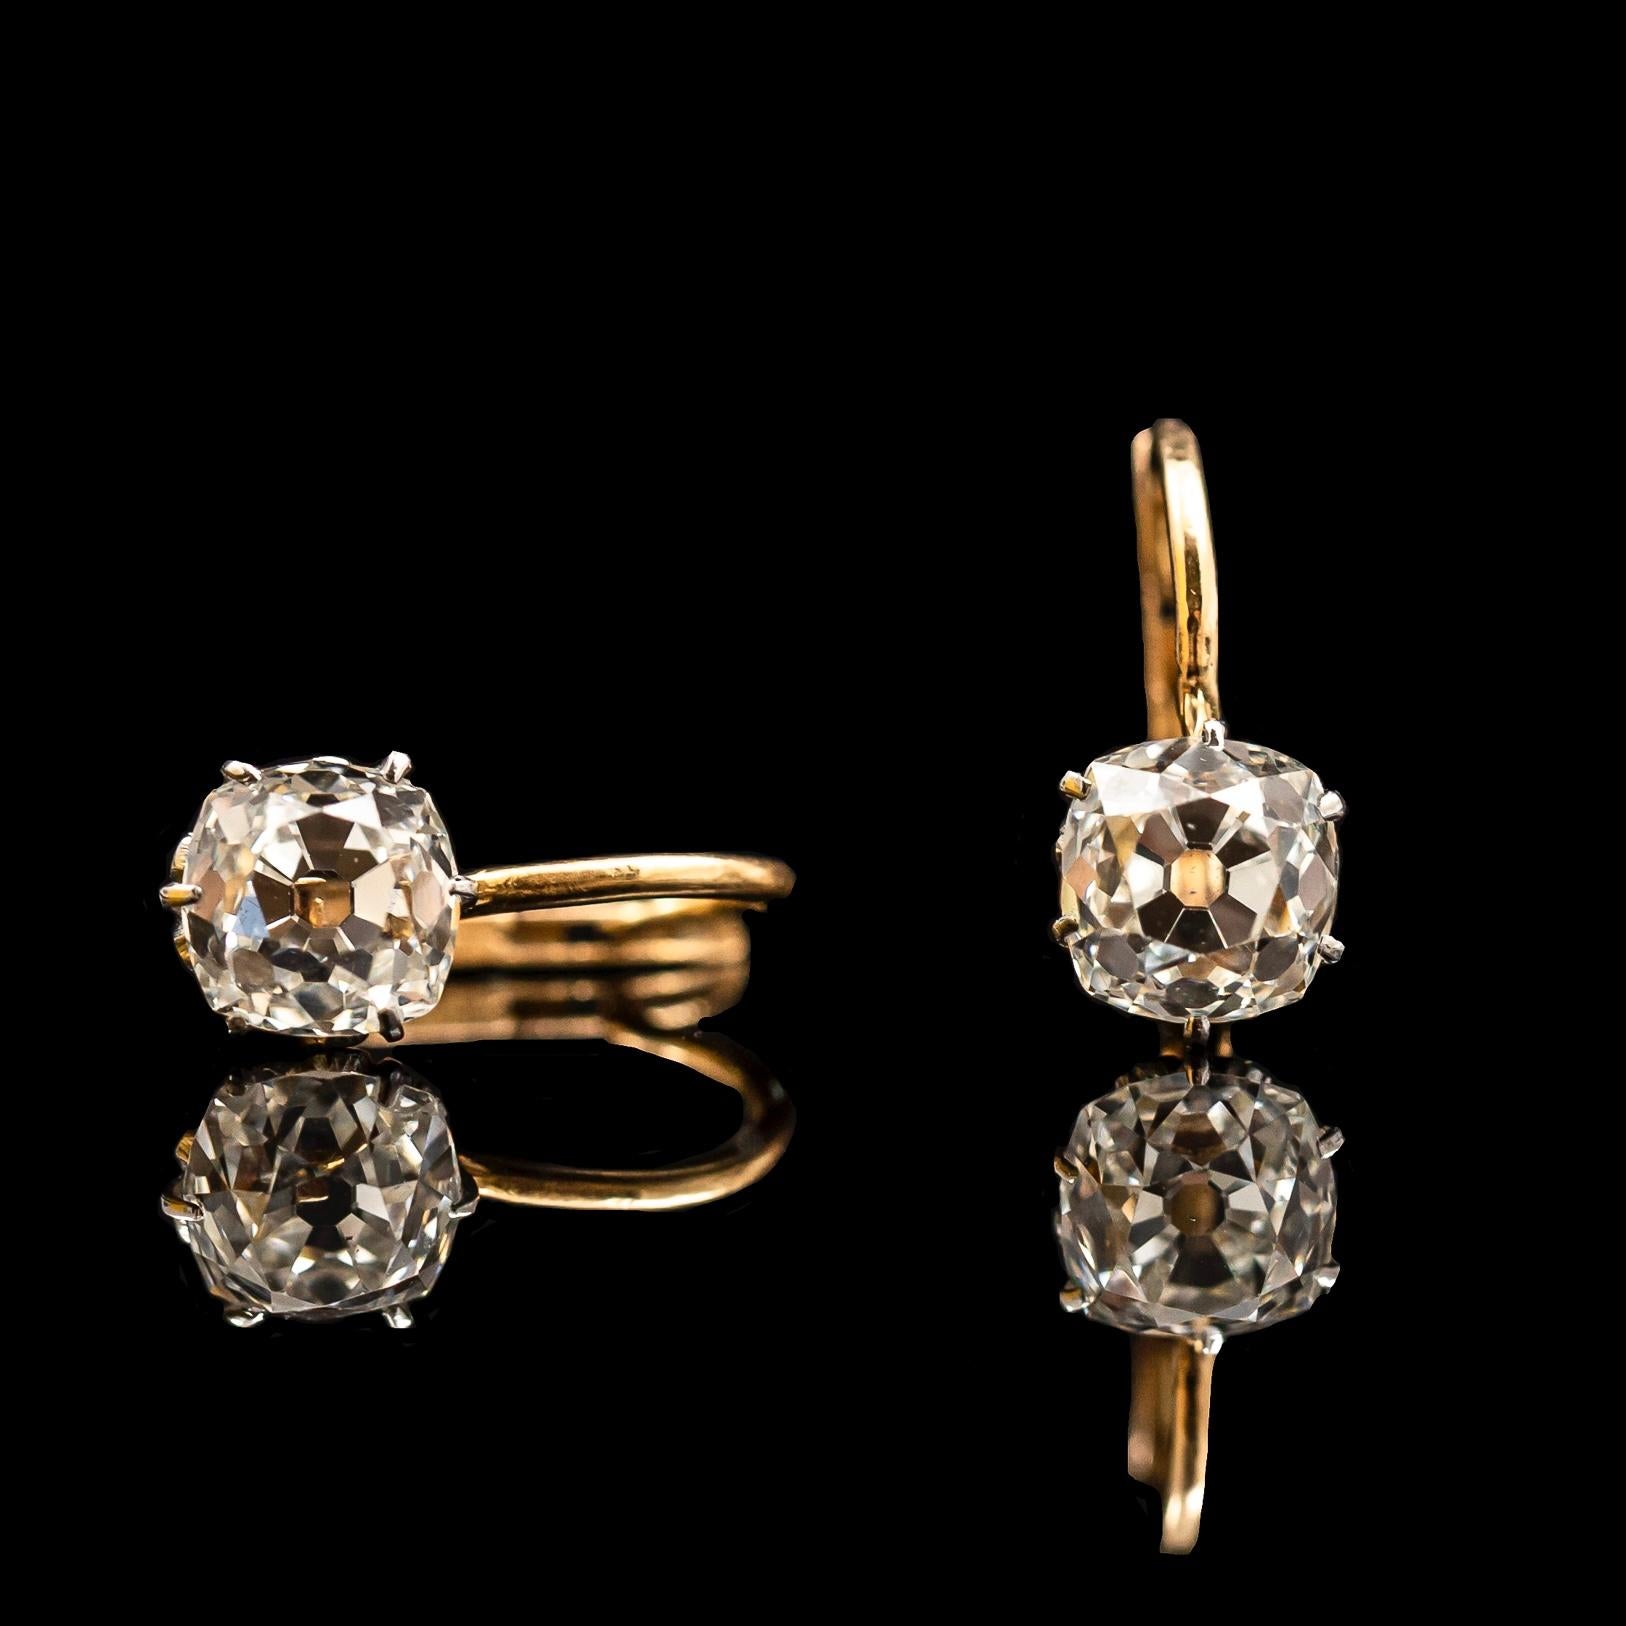 Antique Edwardian 3.4ct Old Mine-Cut Diamond Earrings in Yellow Gold, Portuguese, Hallmark and Maker’s Mark, Cased, circa 1917.

This early 20th century pair of earrings features two extremely sparkly and clear old-cut diamonds, with unrivaled charm